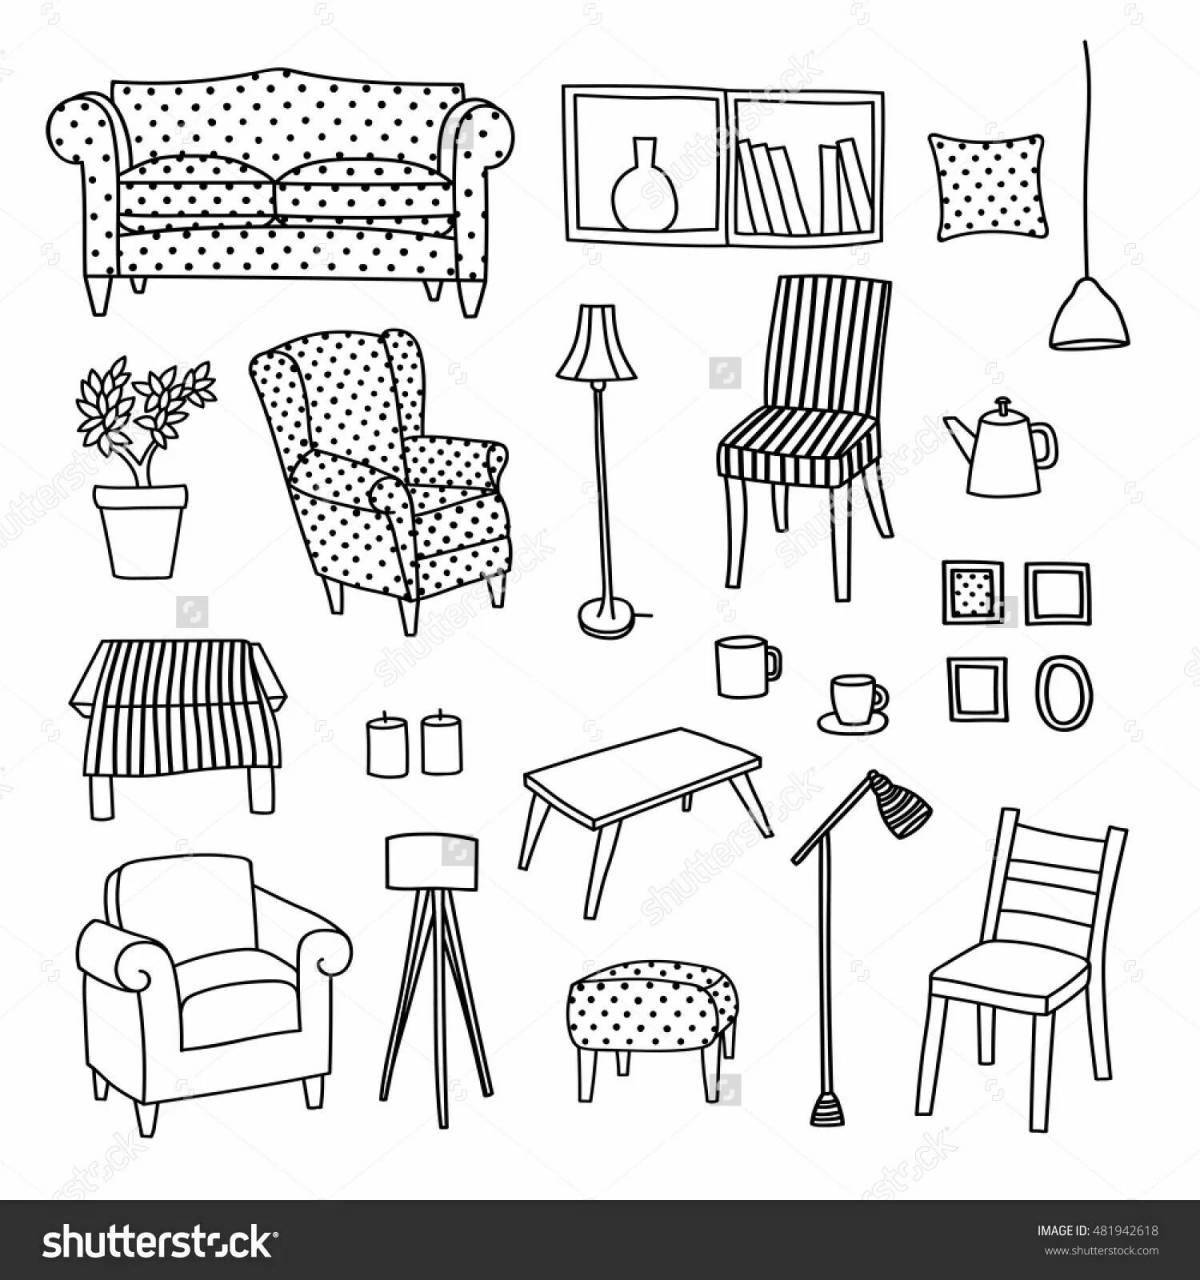 Charming furniture coloring book